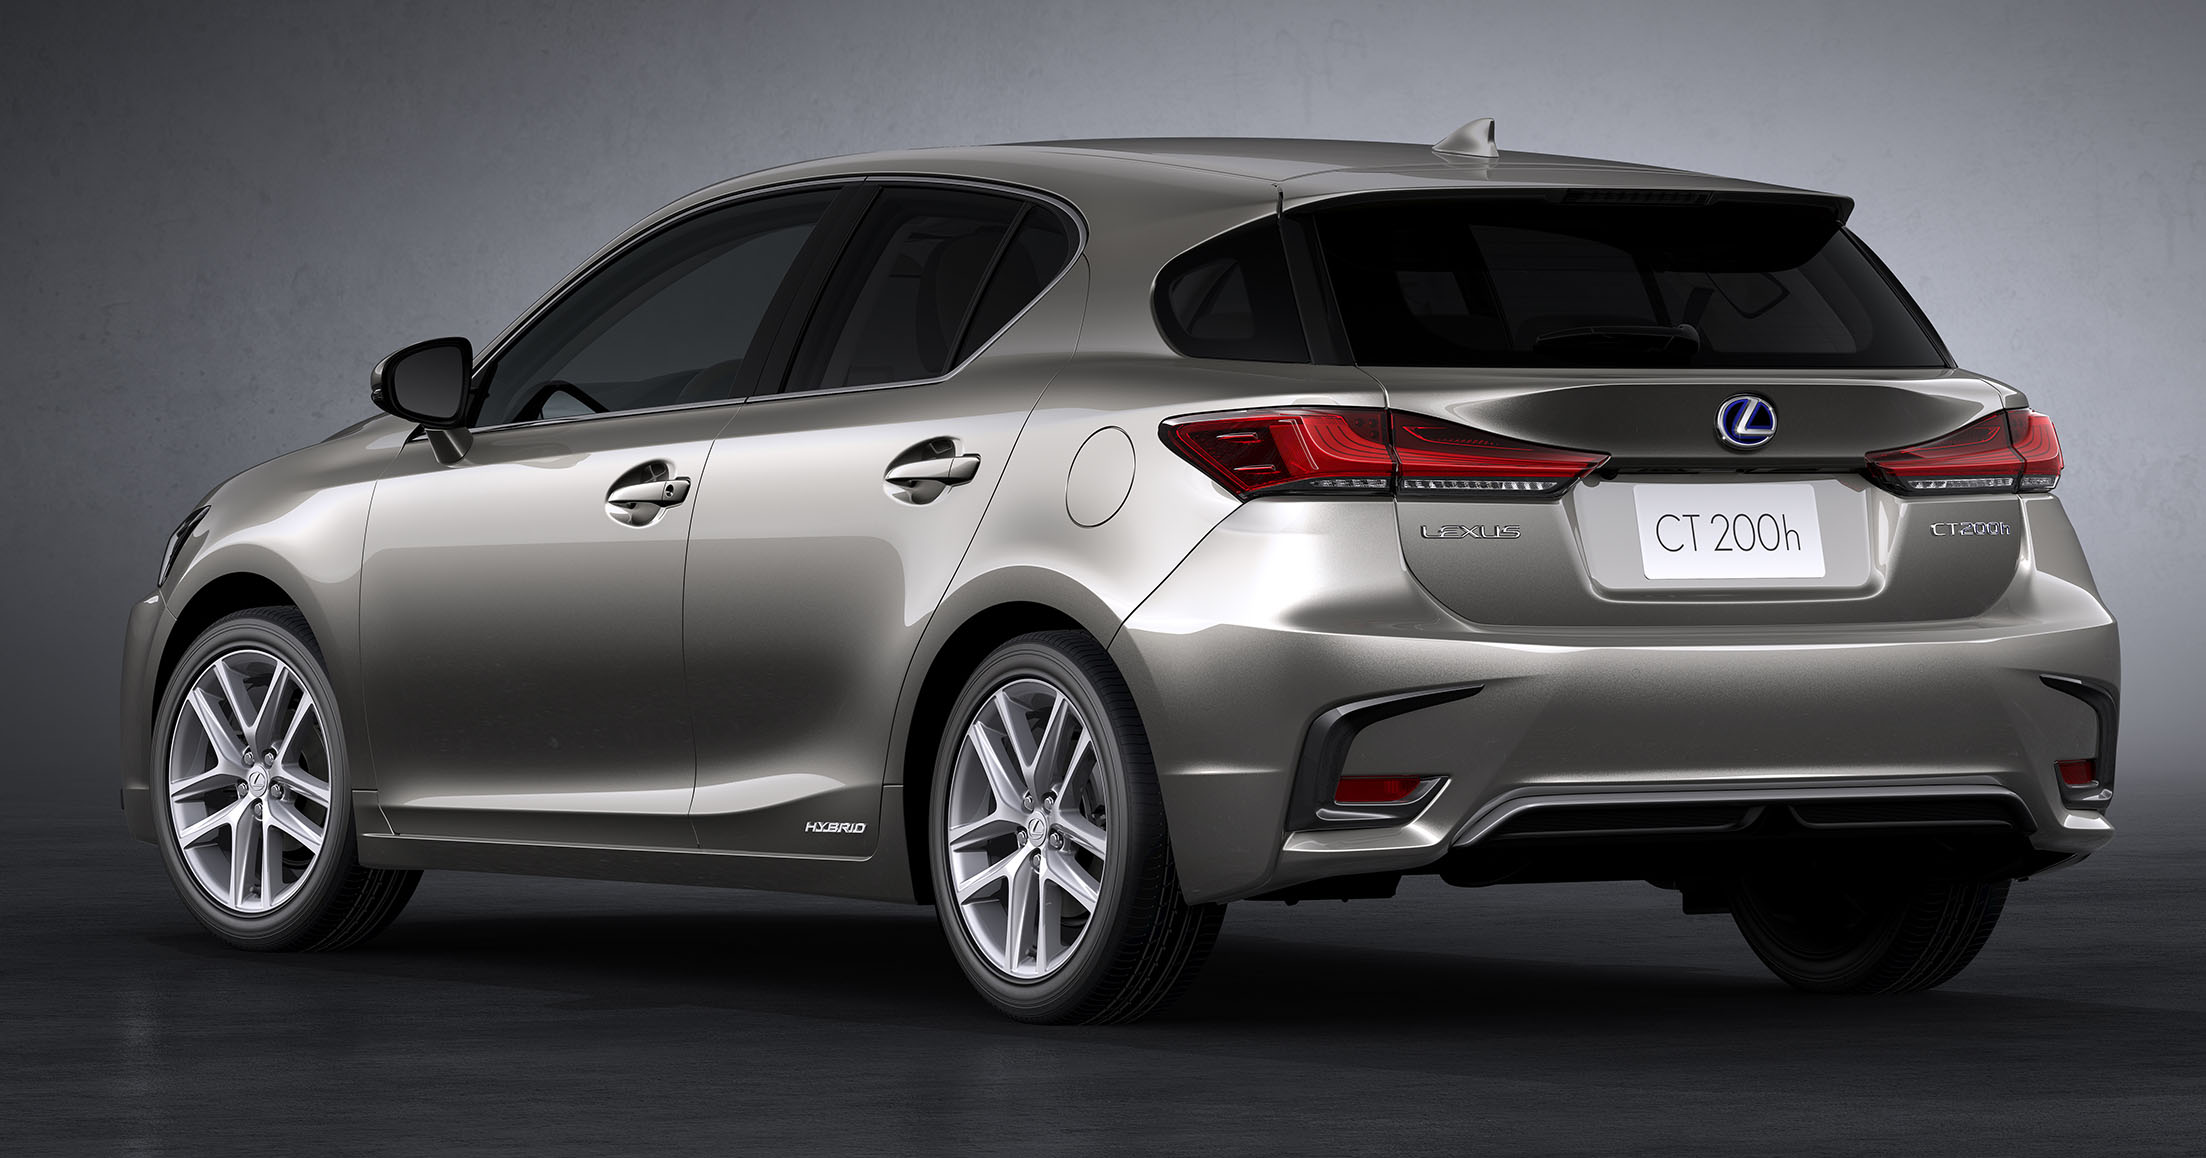 18 Lexus Ct 0h Revealed With New Styling Tech Paultan Org